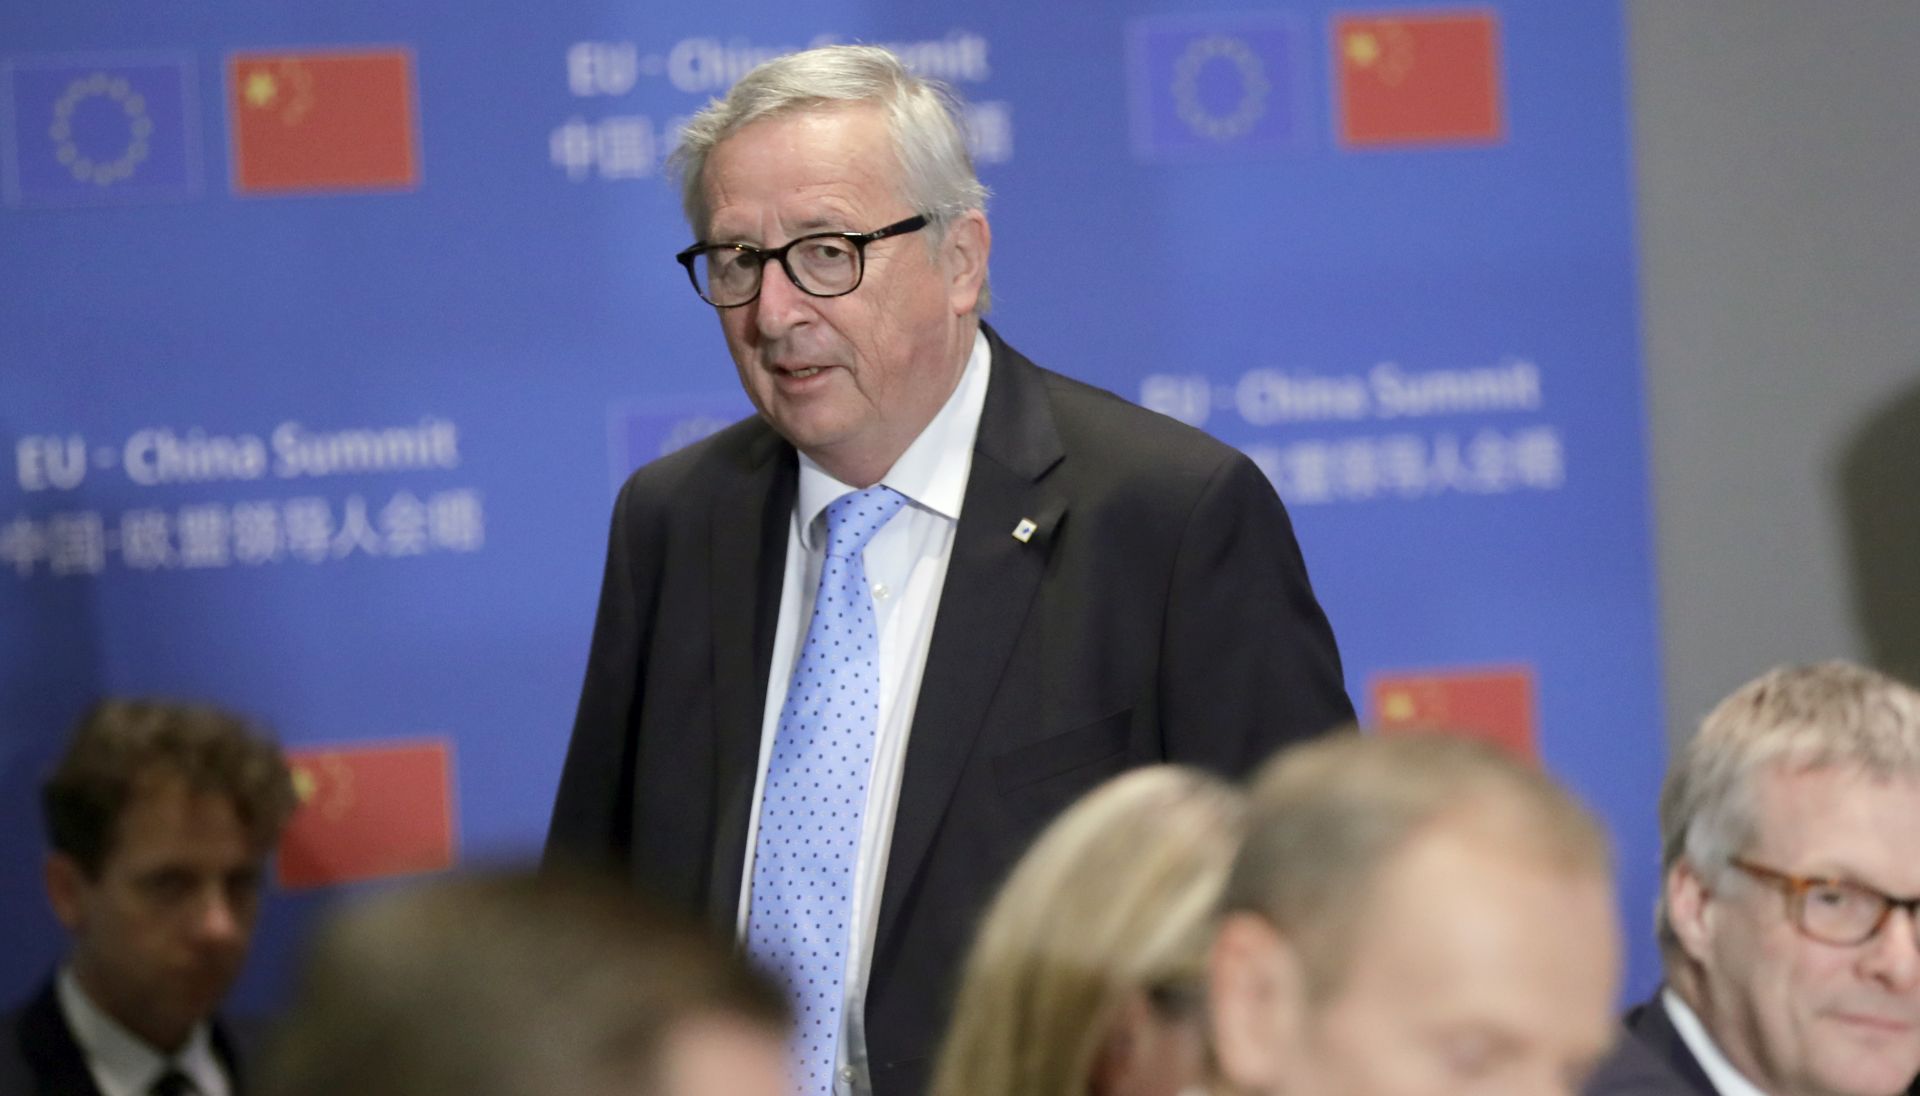 epa07493913 European Commission President Jean-Claude Juncker attends an EU-China Summit meeting at the European Council in Brussels, Belgium, 09 April 2019.  EPA/OLIVIER HOSLET / POOL